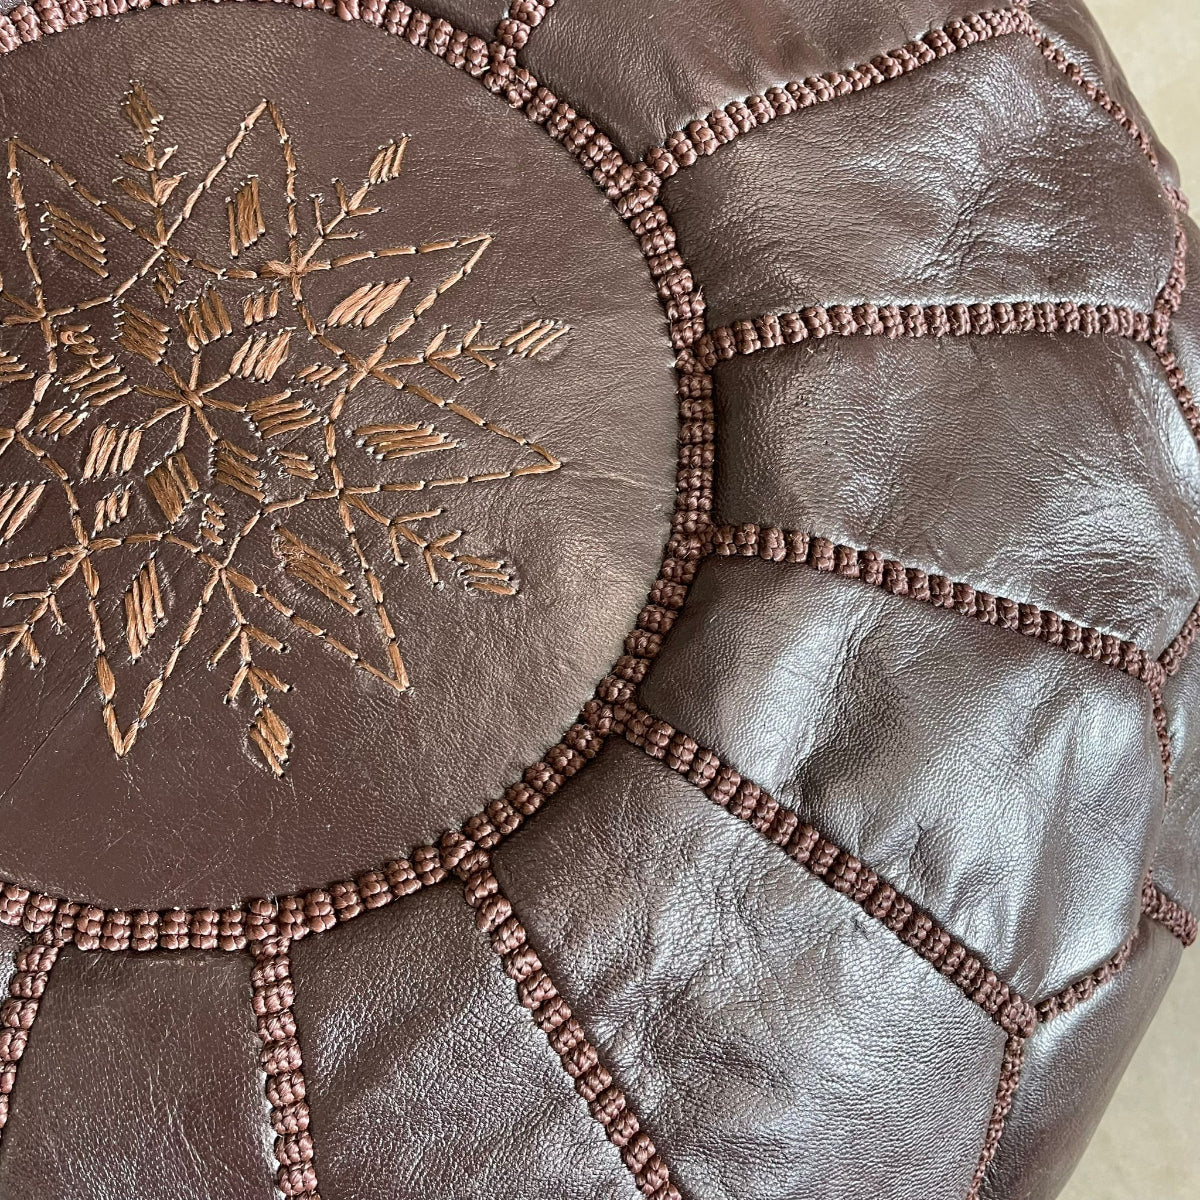 Dark Chocolate Moroccan Leather Pouffe Cover